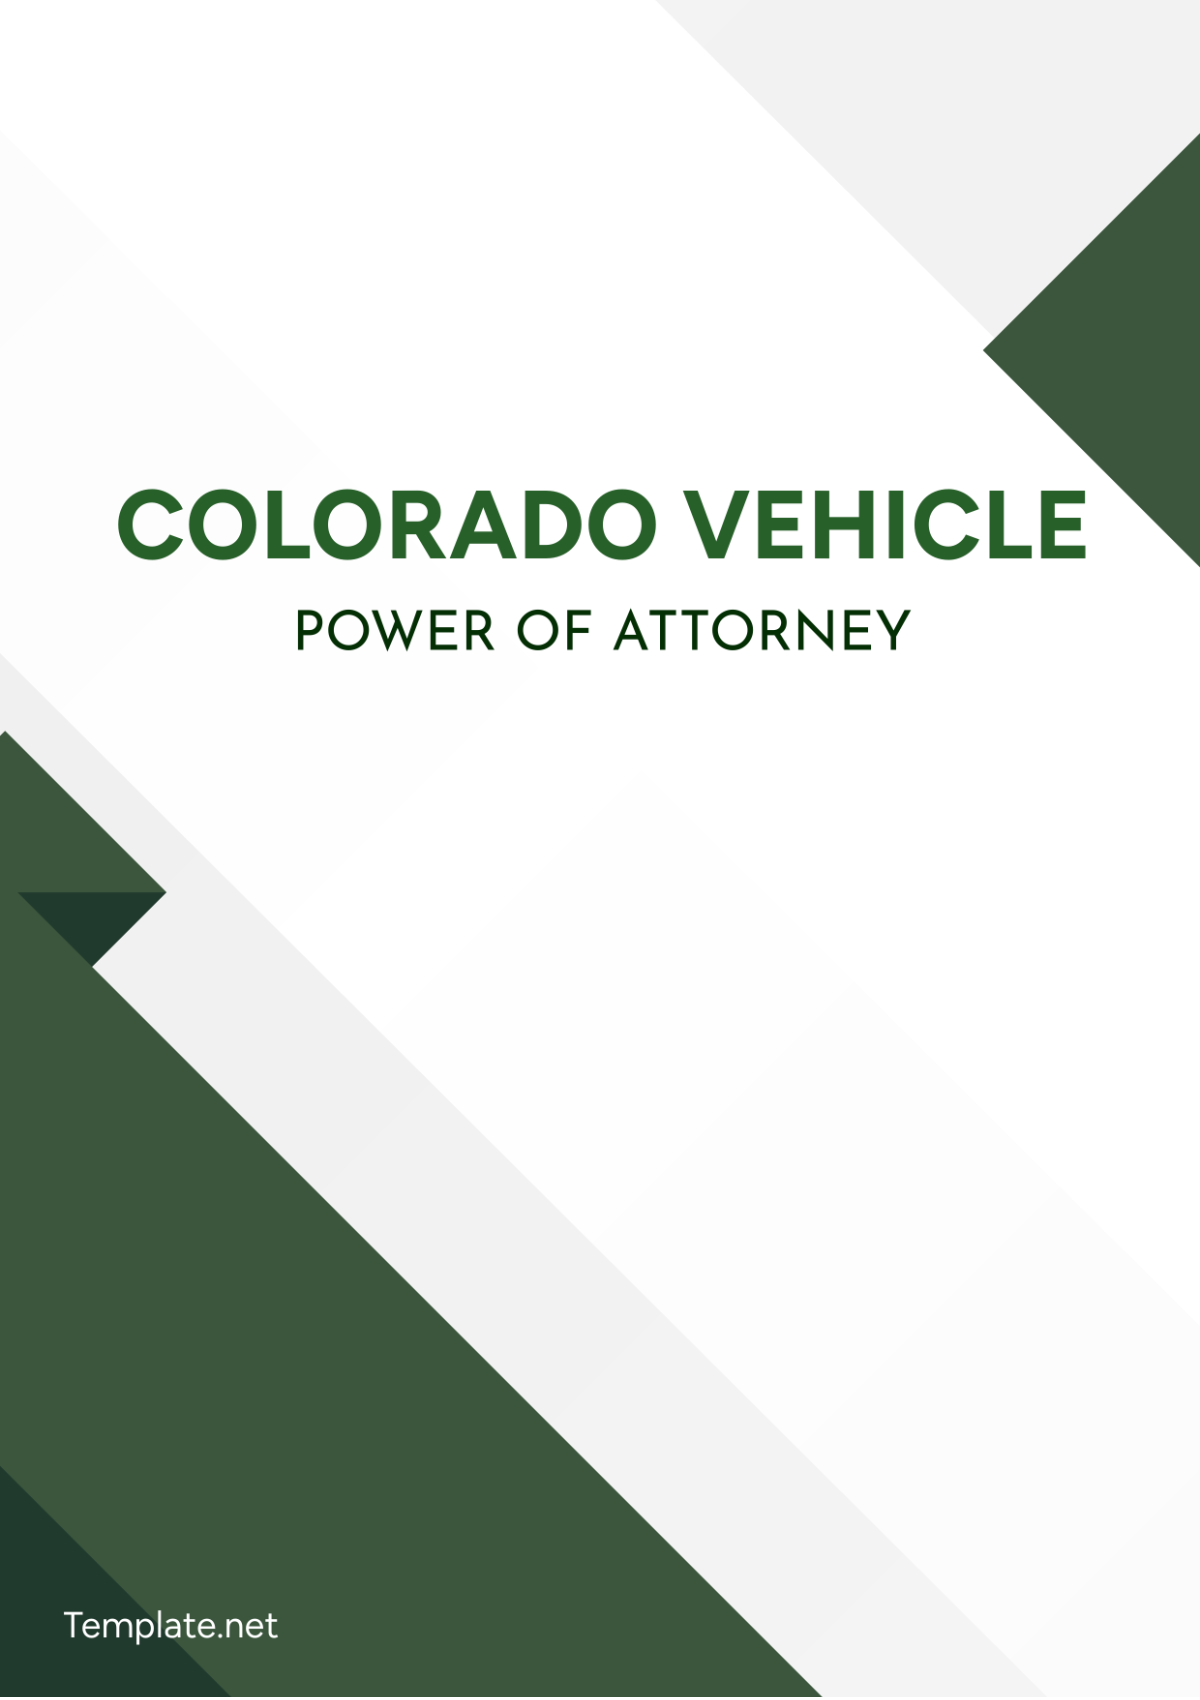 Colorado Vehicle Power of Attorney Template